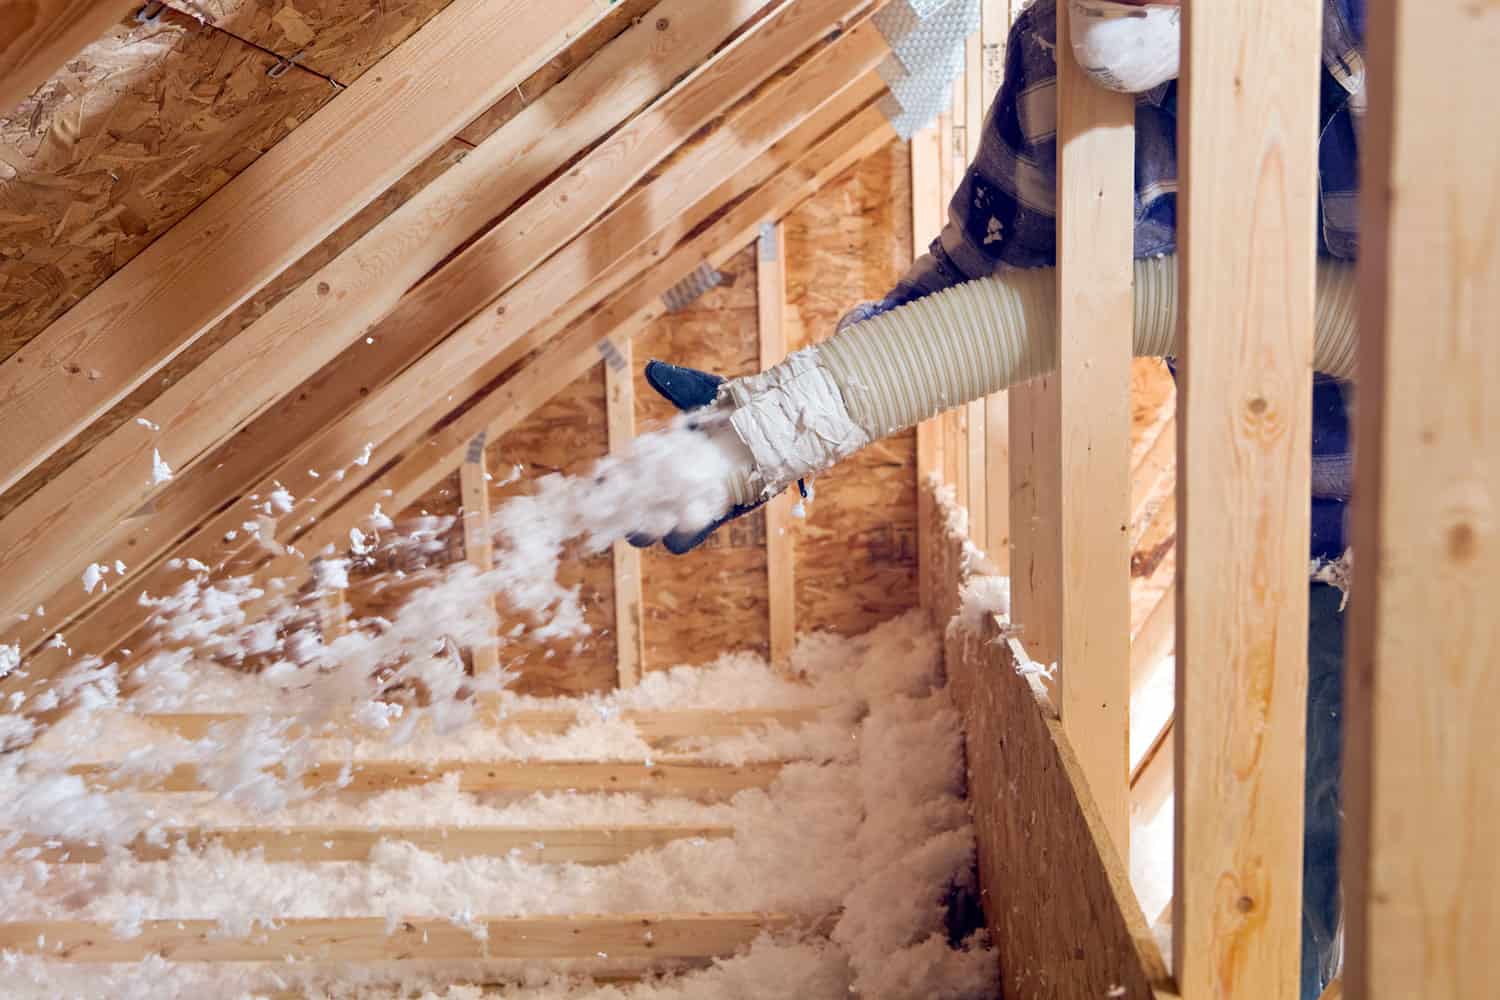 Insulation specialist using a blower in applying insulation in the attic